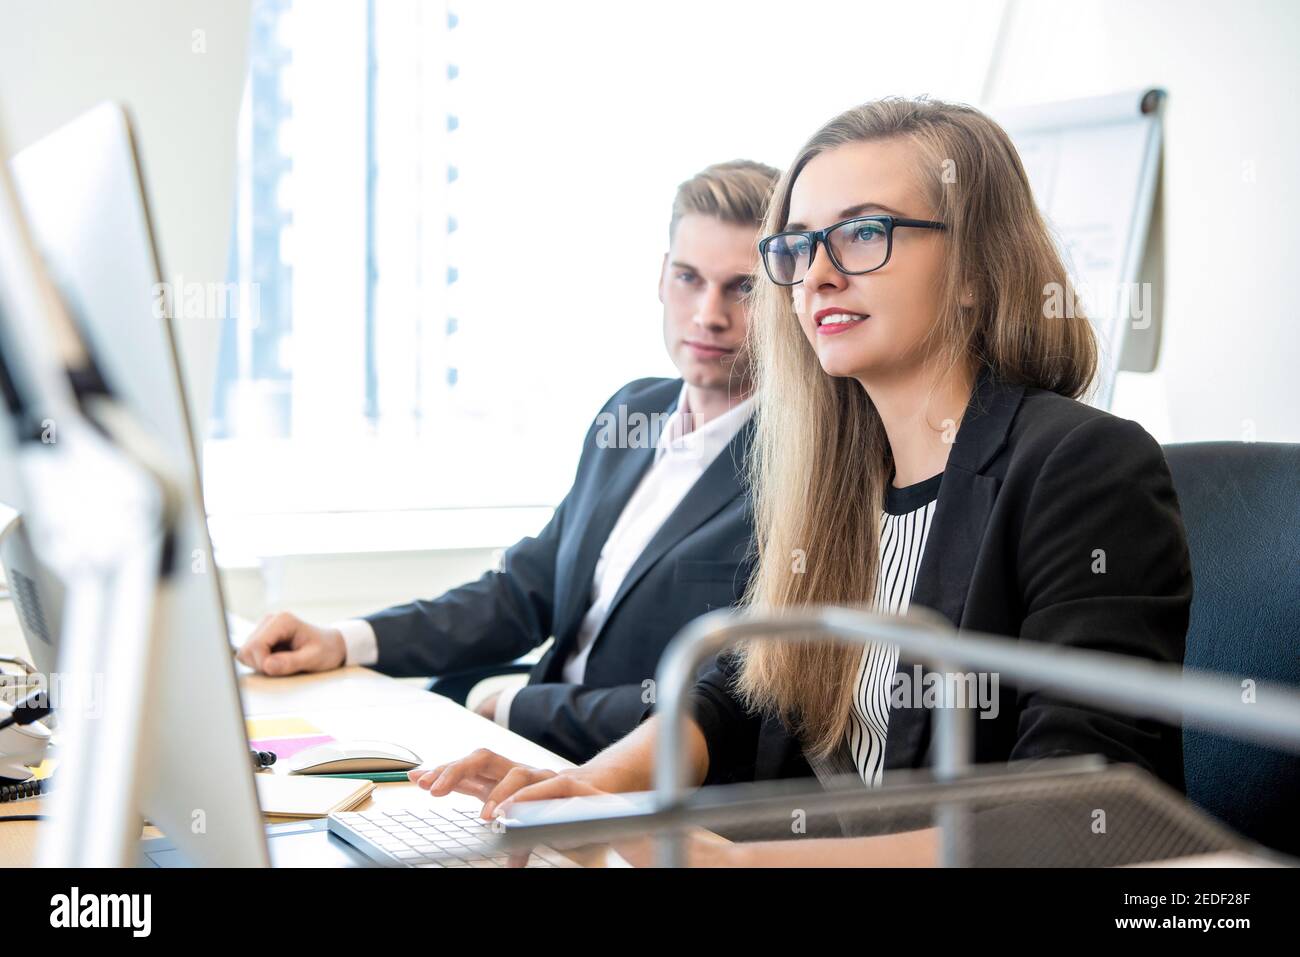 Beautiful businesswoman working on computer at the office with male coworker Stock Photo